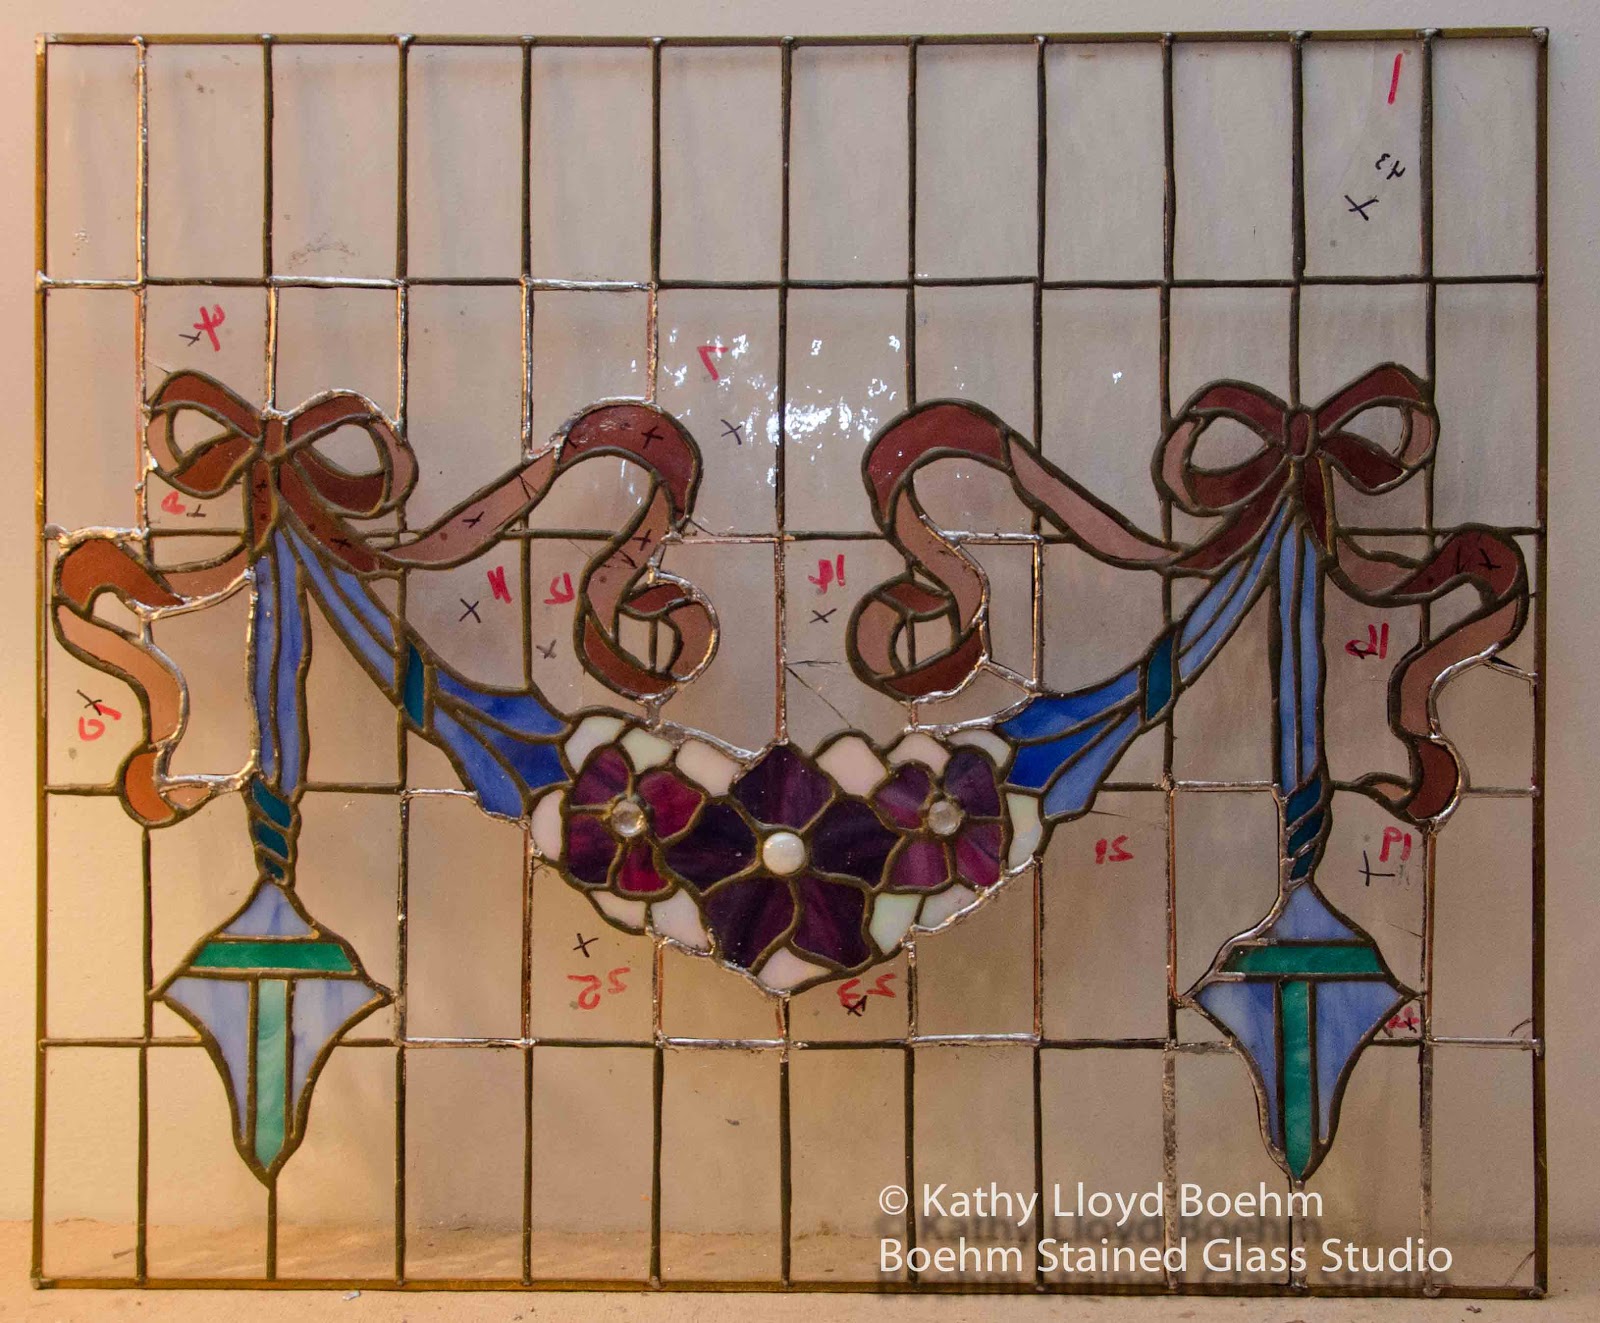 Boehm Stained Glass Blog: Rug Design in Stained Glass - Soldered